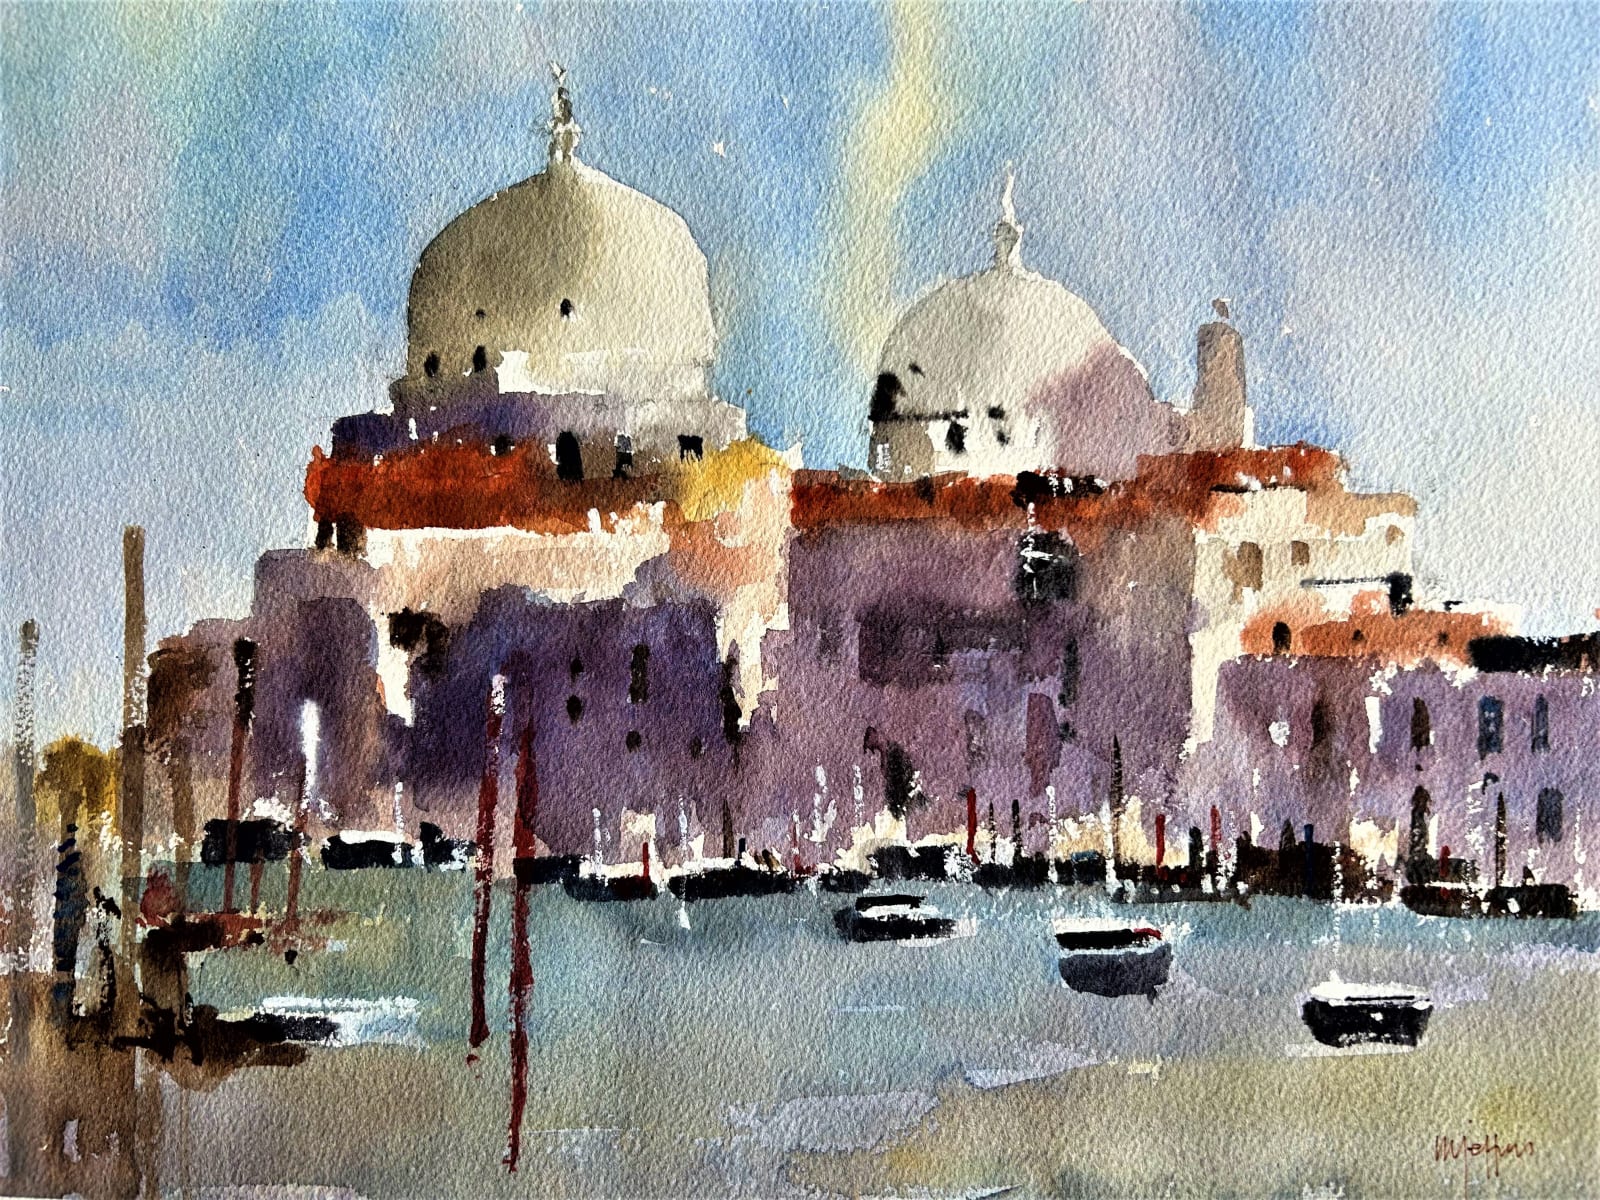 Mike Jeffries, grand canal, venice